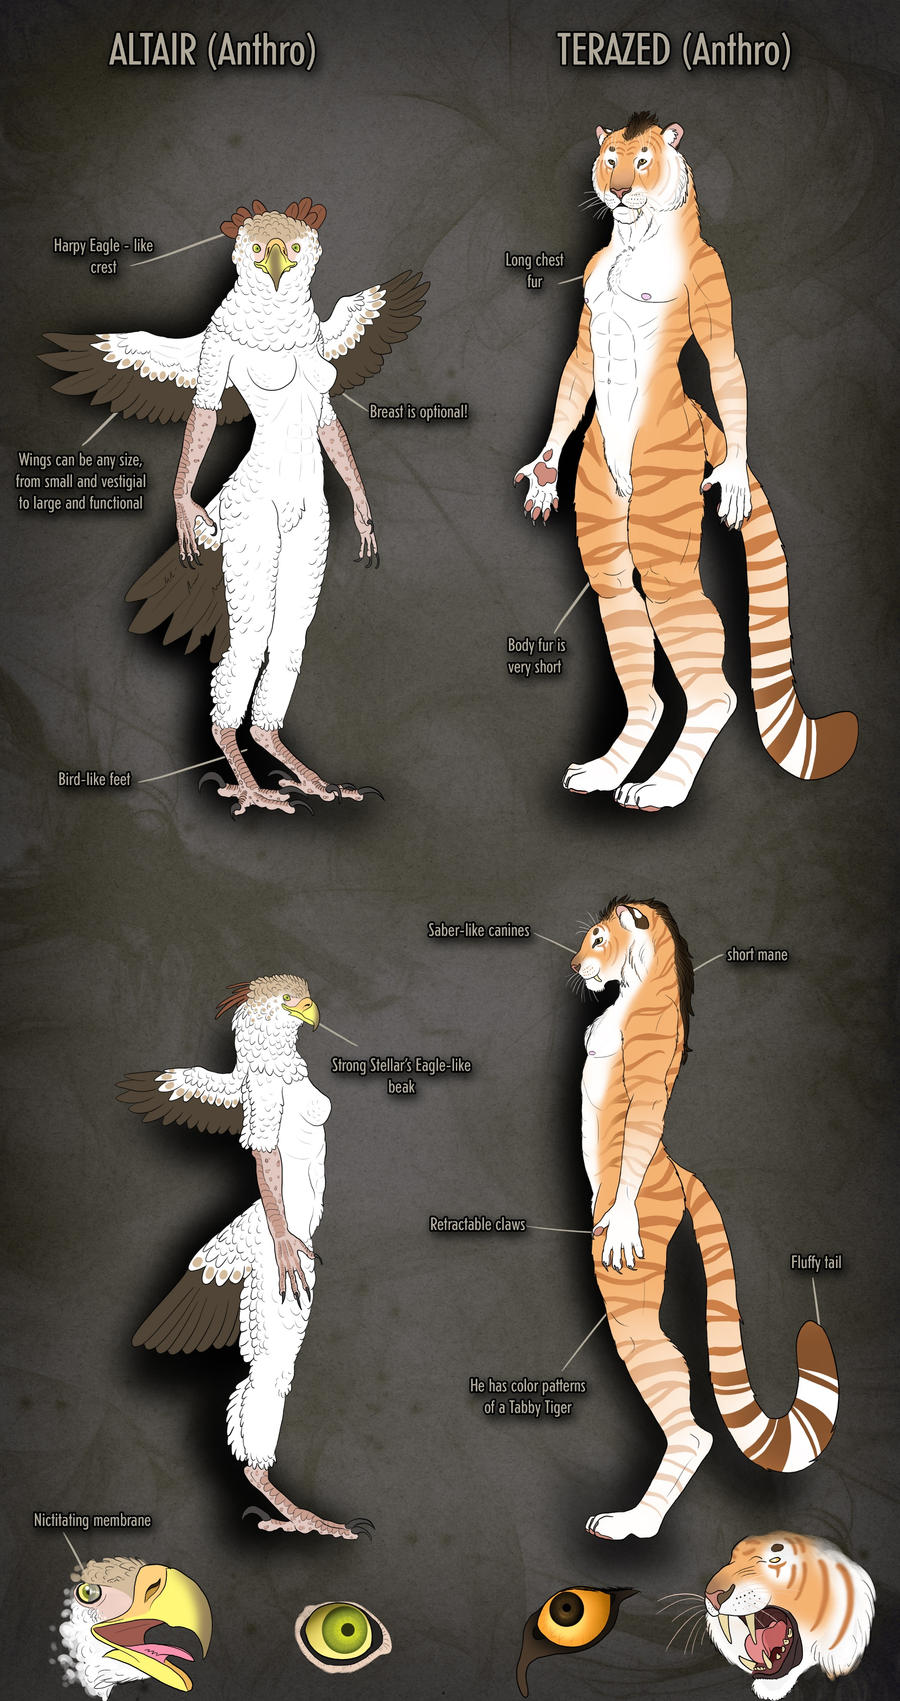 anthro_altair_terazed_reference_sheet_by_altairsky_d4kyhki-fullview.jpg